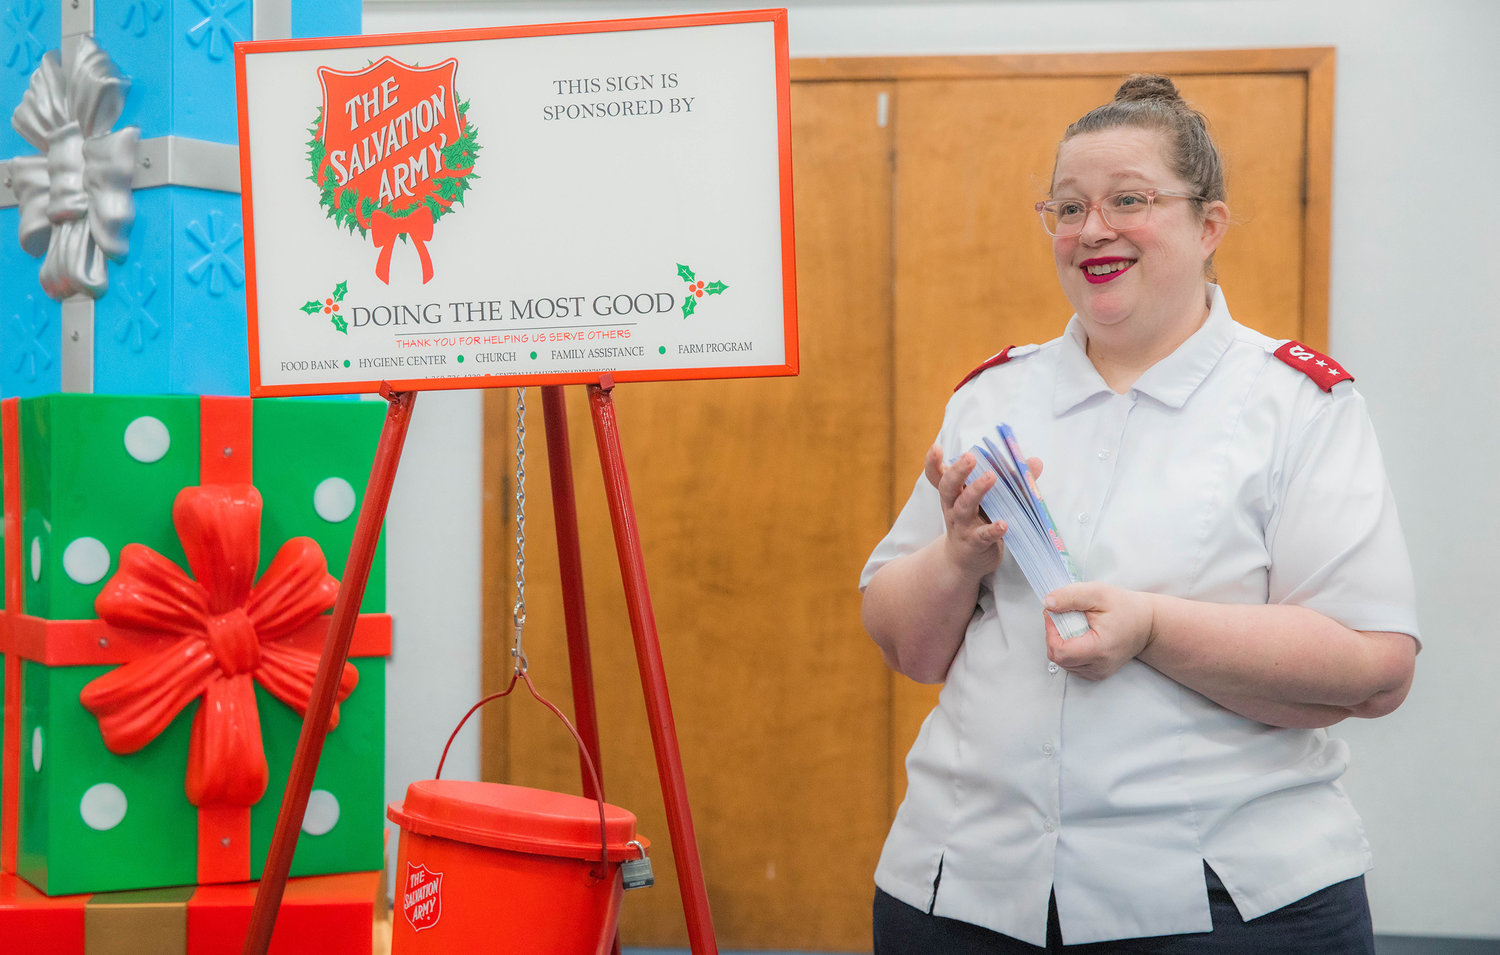 Captain Gin Pack, with The Salvation Army, smiles while talking about a $10,000 donation to the Red Kettle campaign by a local church, Monday in Centralia.